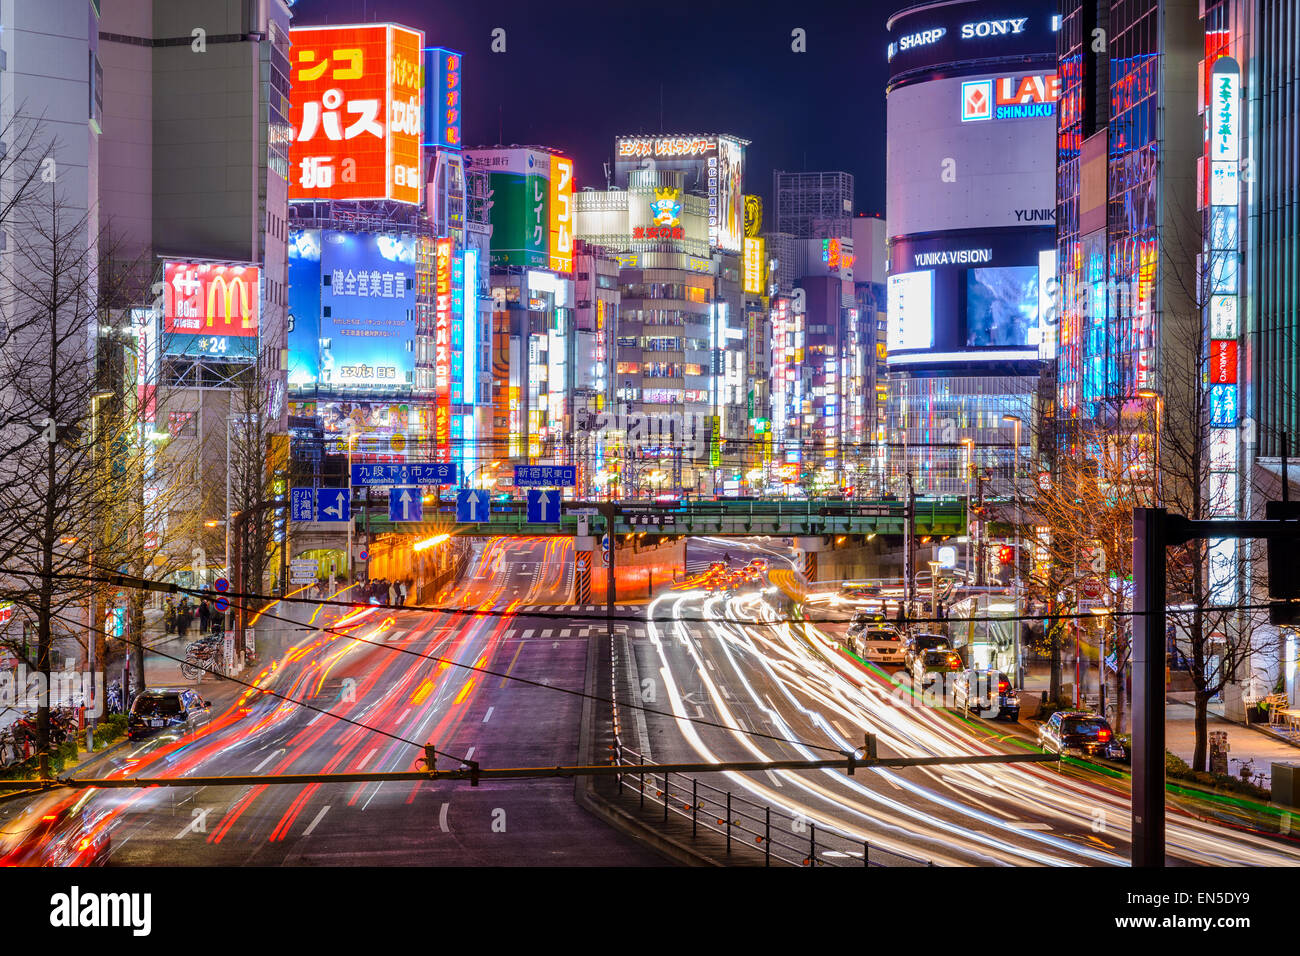 Tokyo, Japan in the Shinjuku district at night. The district is a renown night life center. Stock Photo